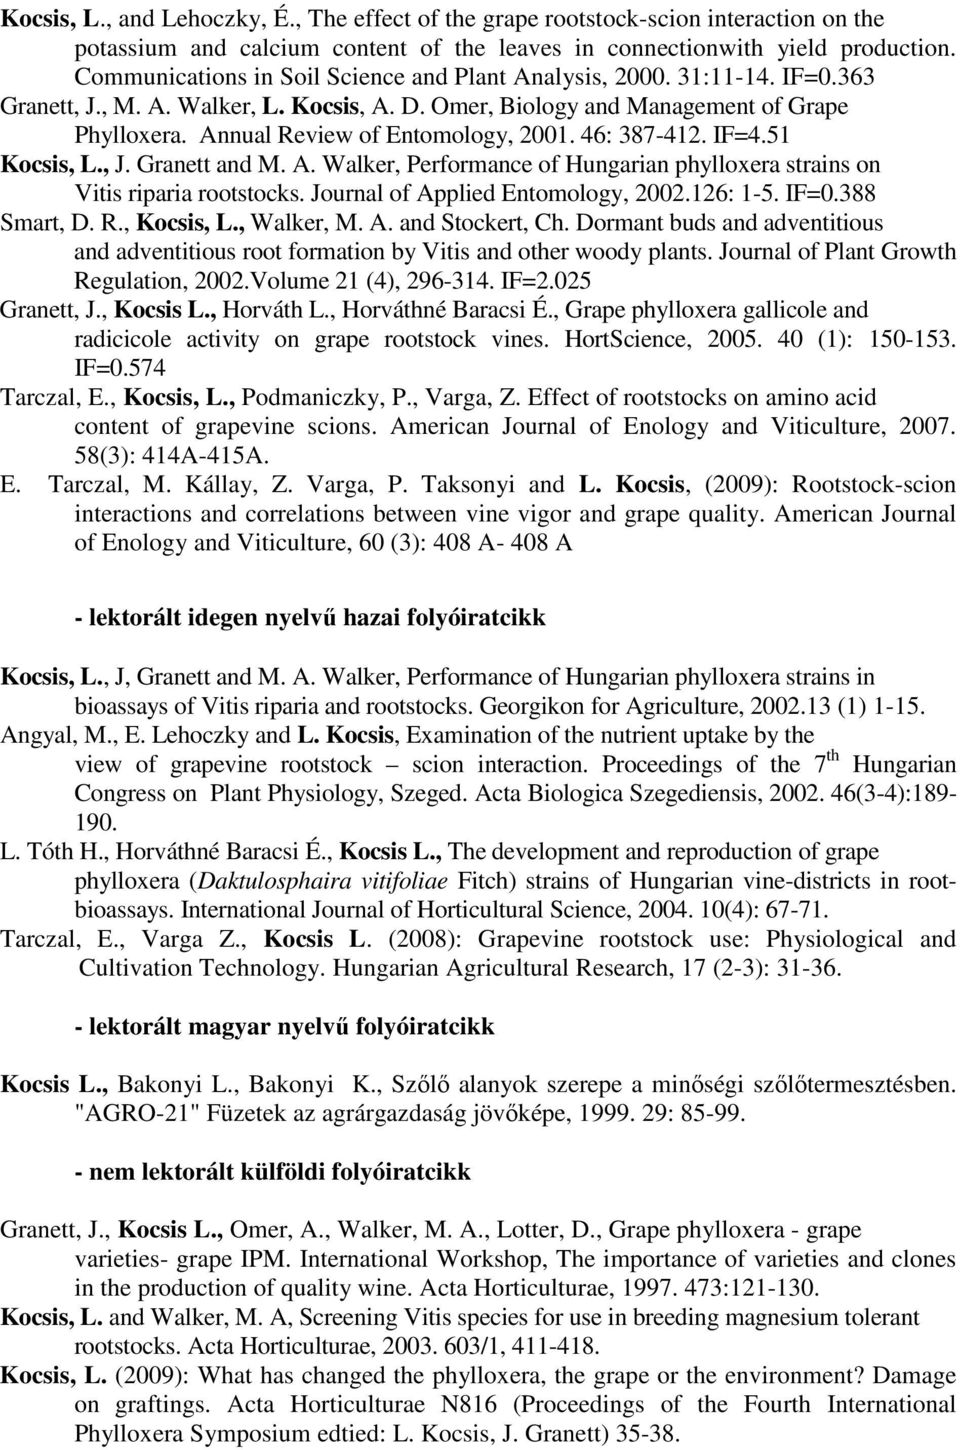 Annual Review of Entomology, 2001. 46: 387-412. IF=4.51 Kocsis, L., J. Granett and M. A. Walker, Performance of Hungarian phylloxera strains on Vitis riparia rootstocks.